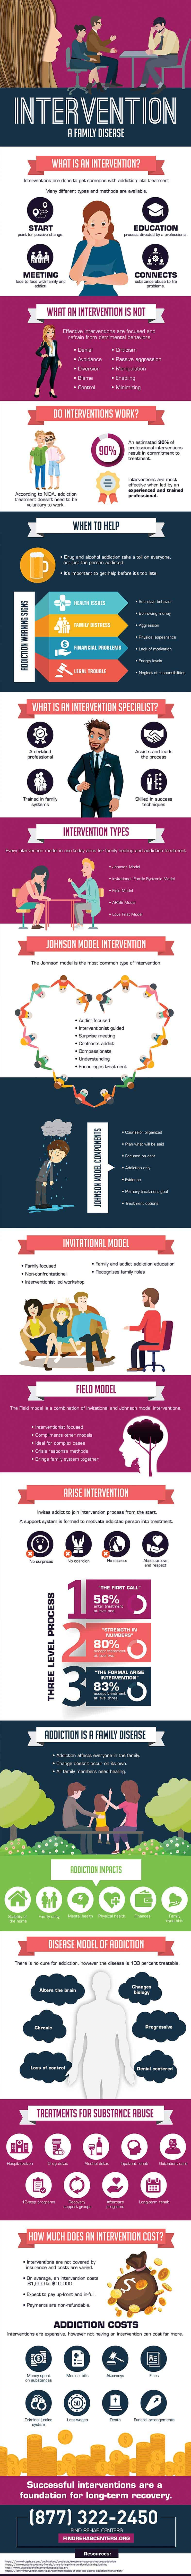 Intervention a Family Disease Infographic